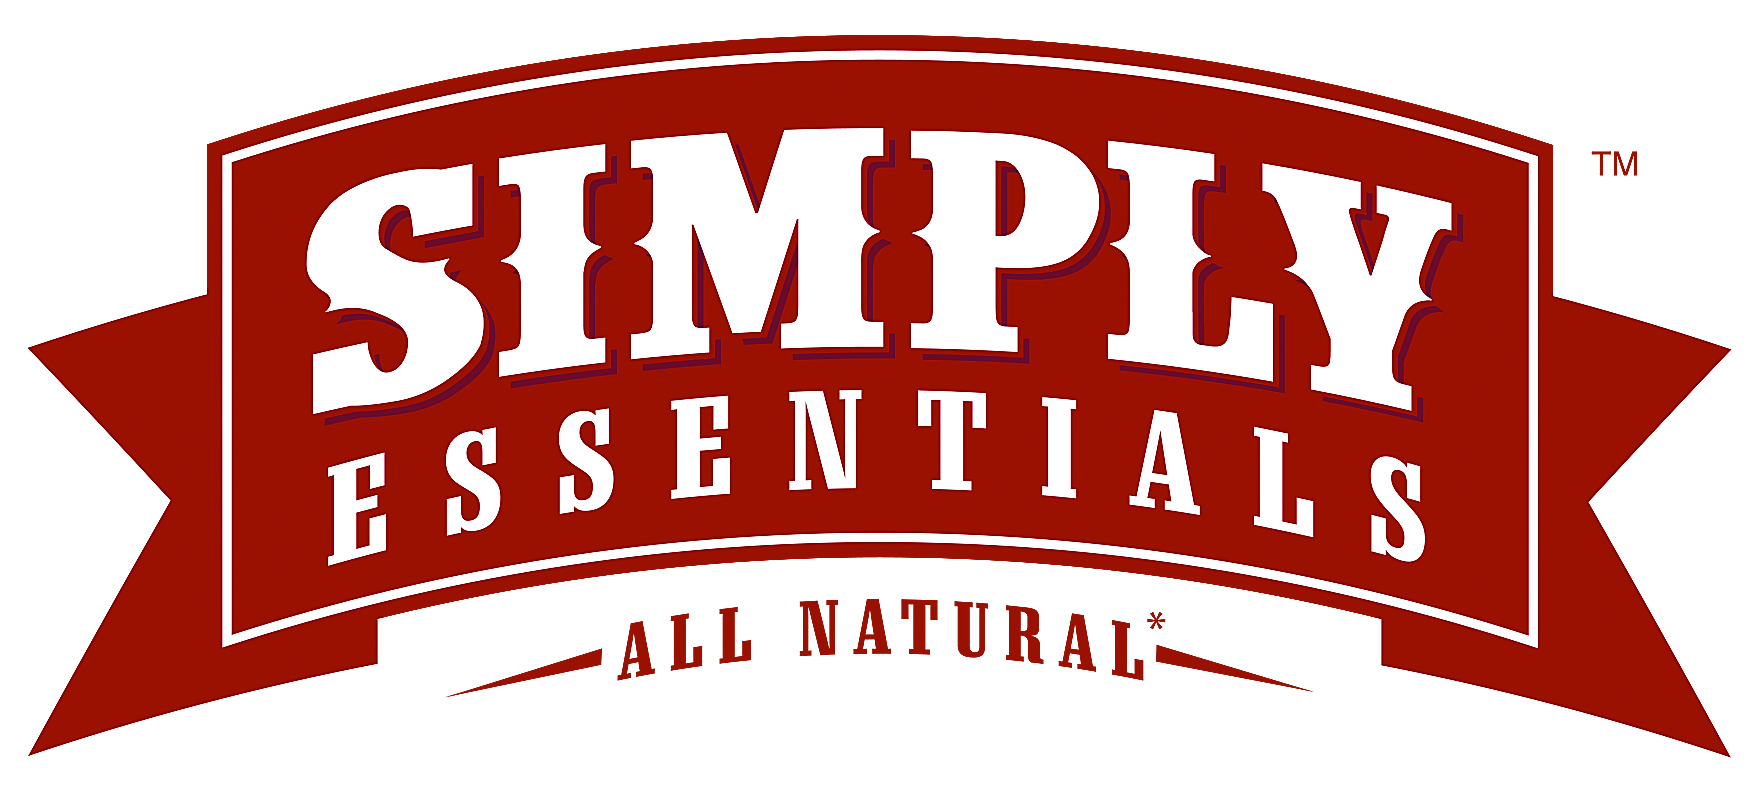 Bankruptcy court approves turnkey sale or auction of Simply Essentials’ assets